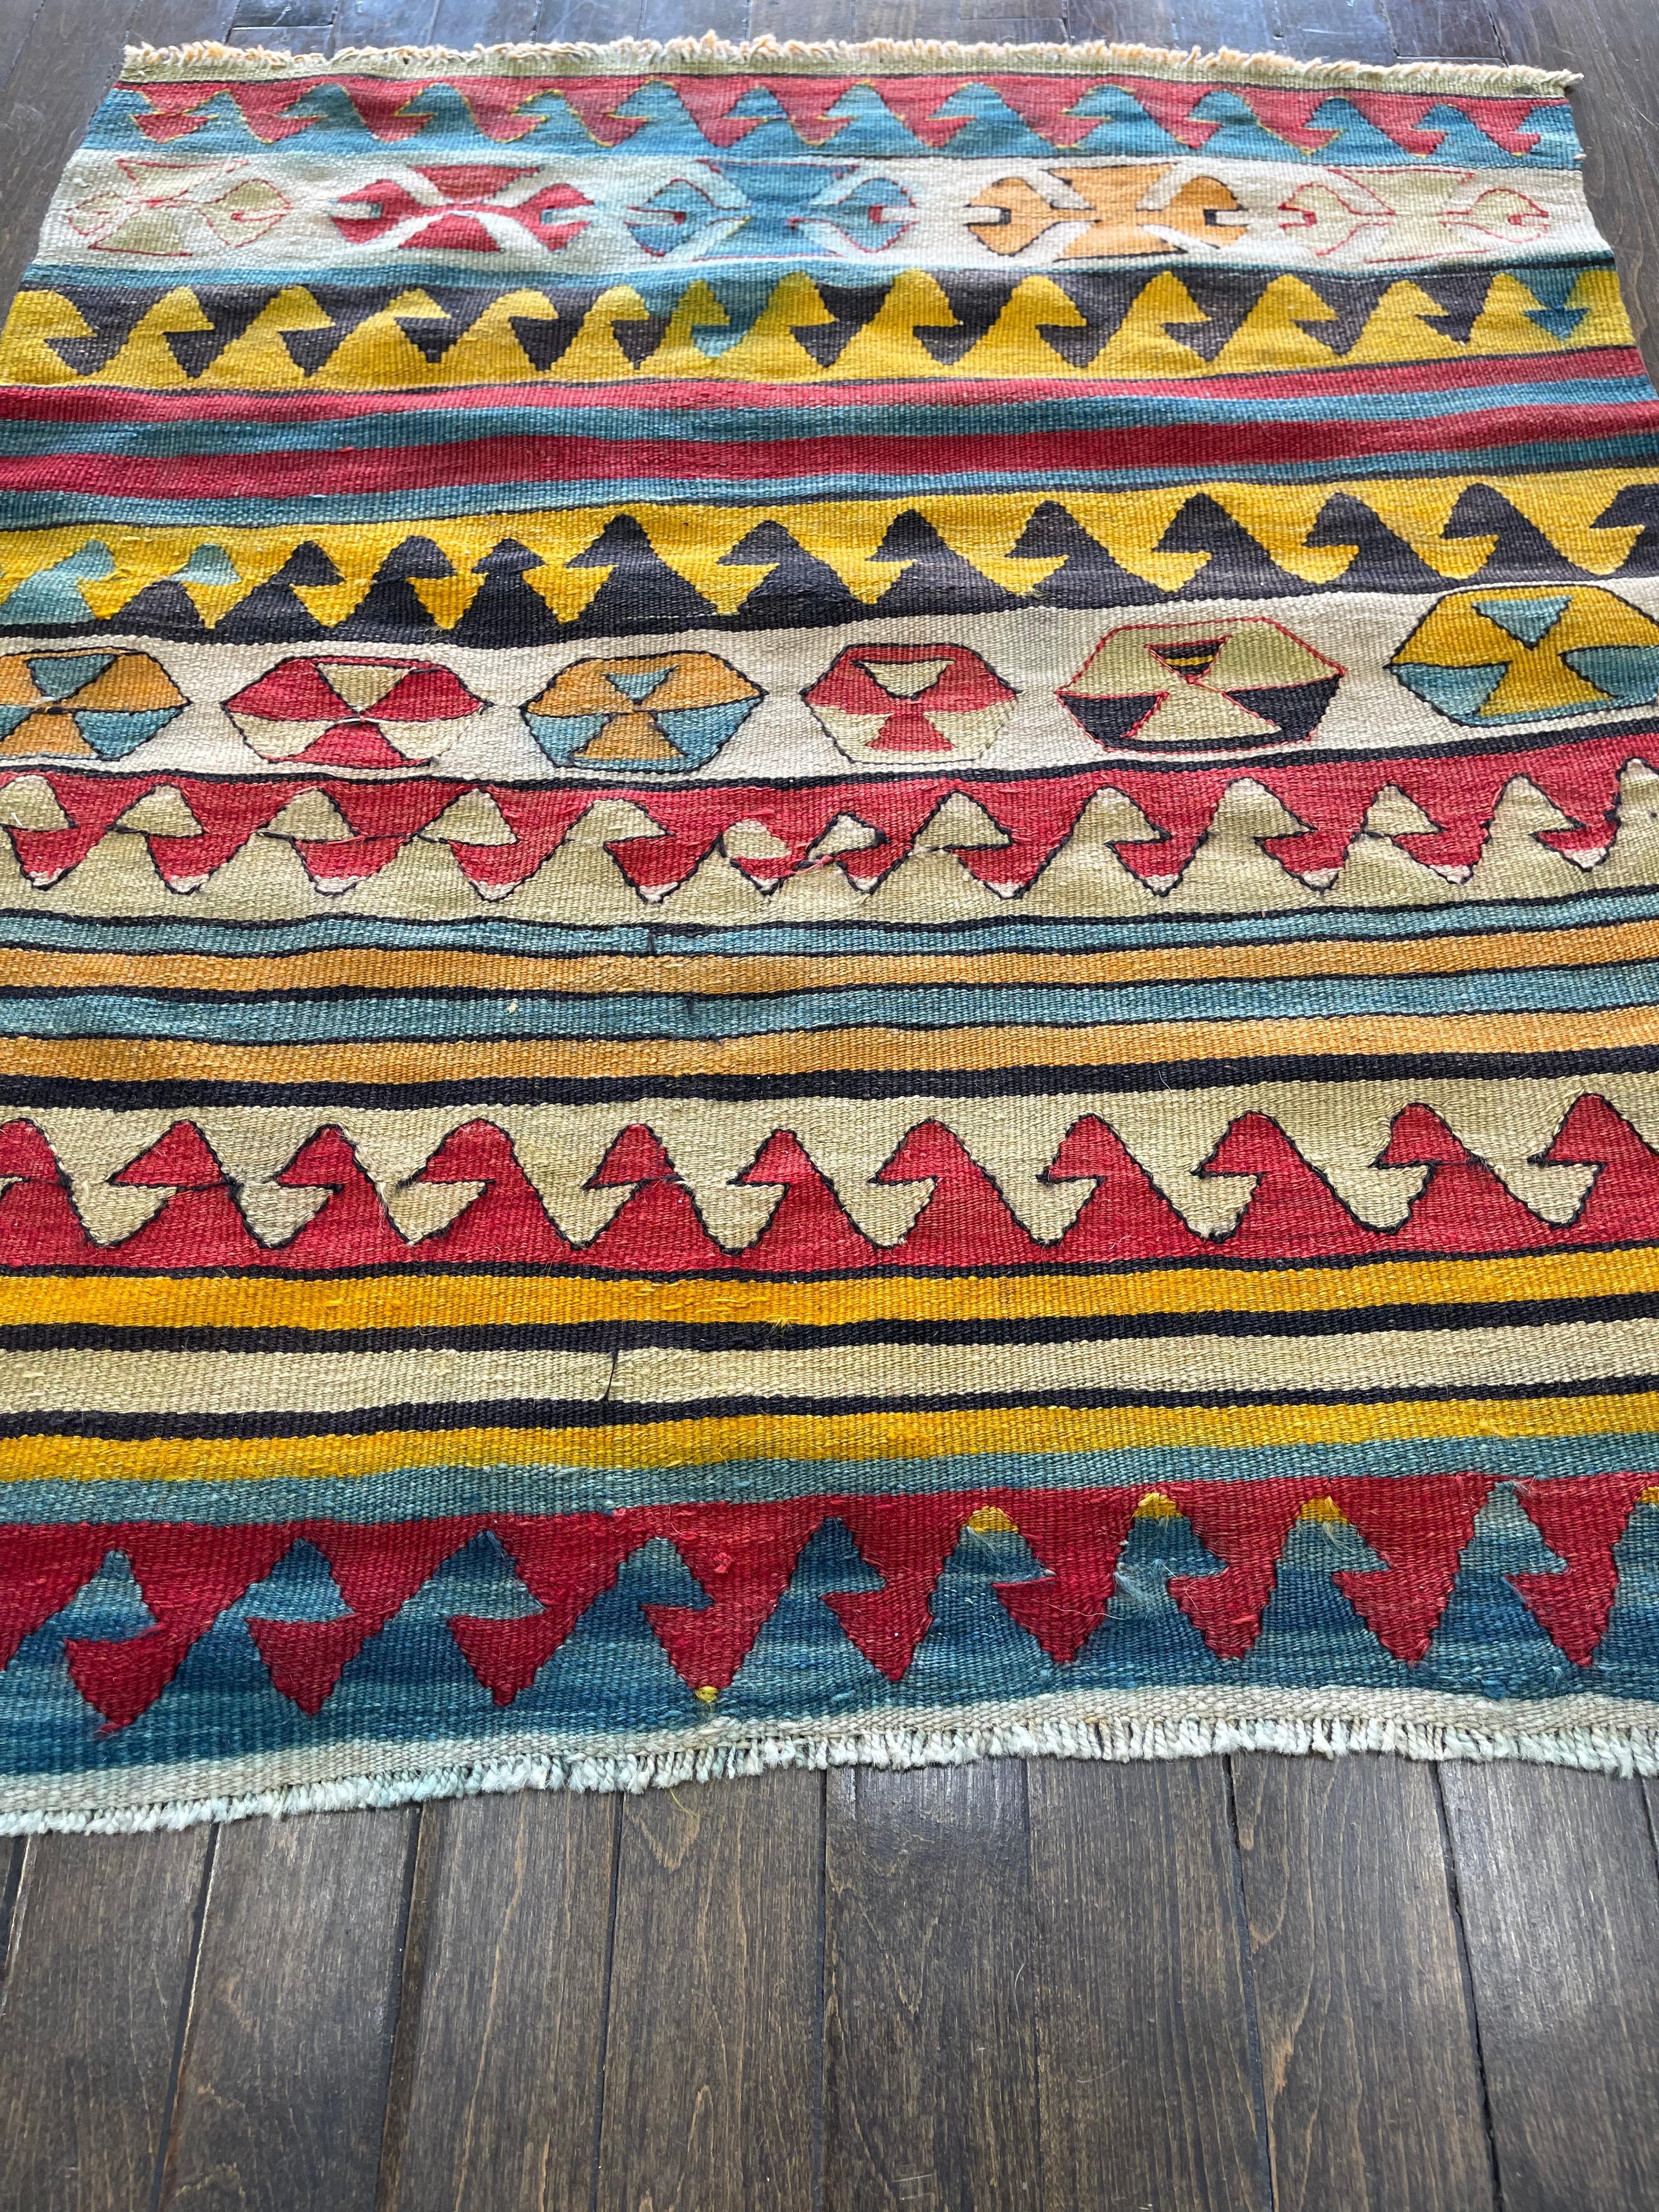 Vegetable Dyed Antique Caucasian Shirvan Rug circa 1900 For Sale